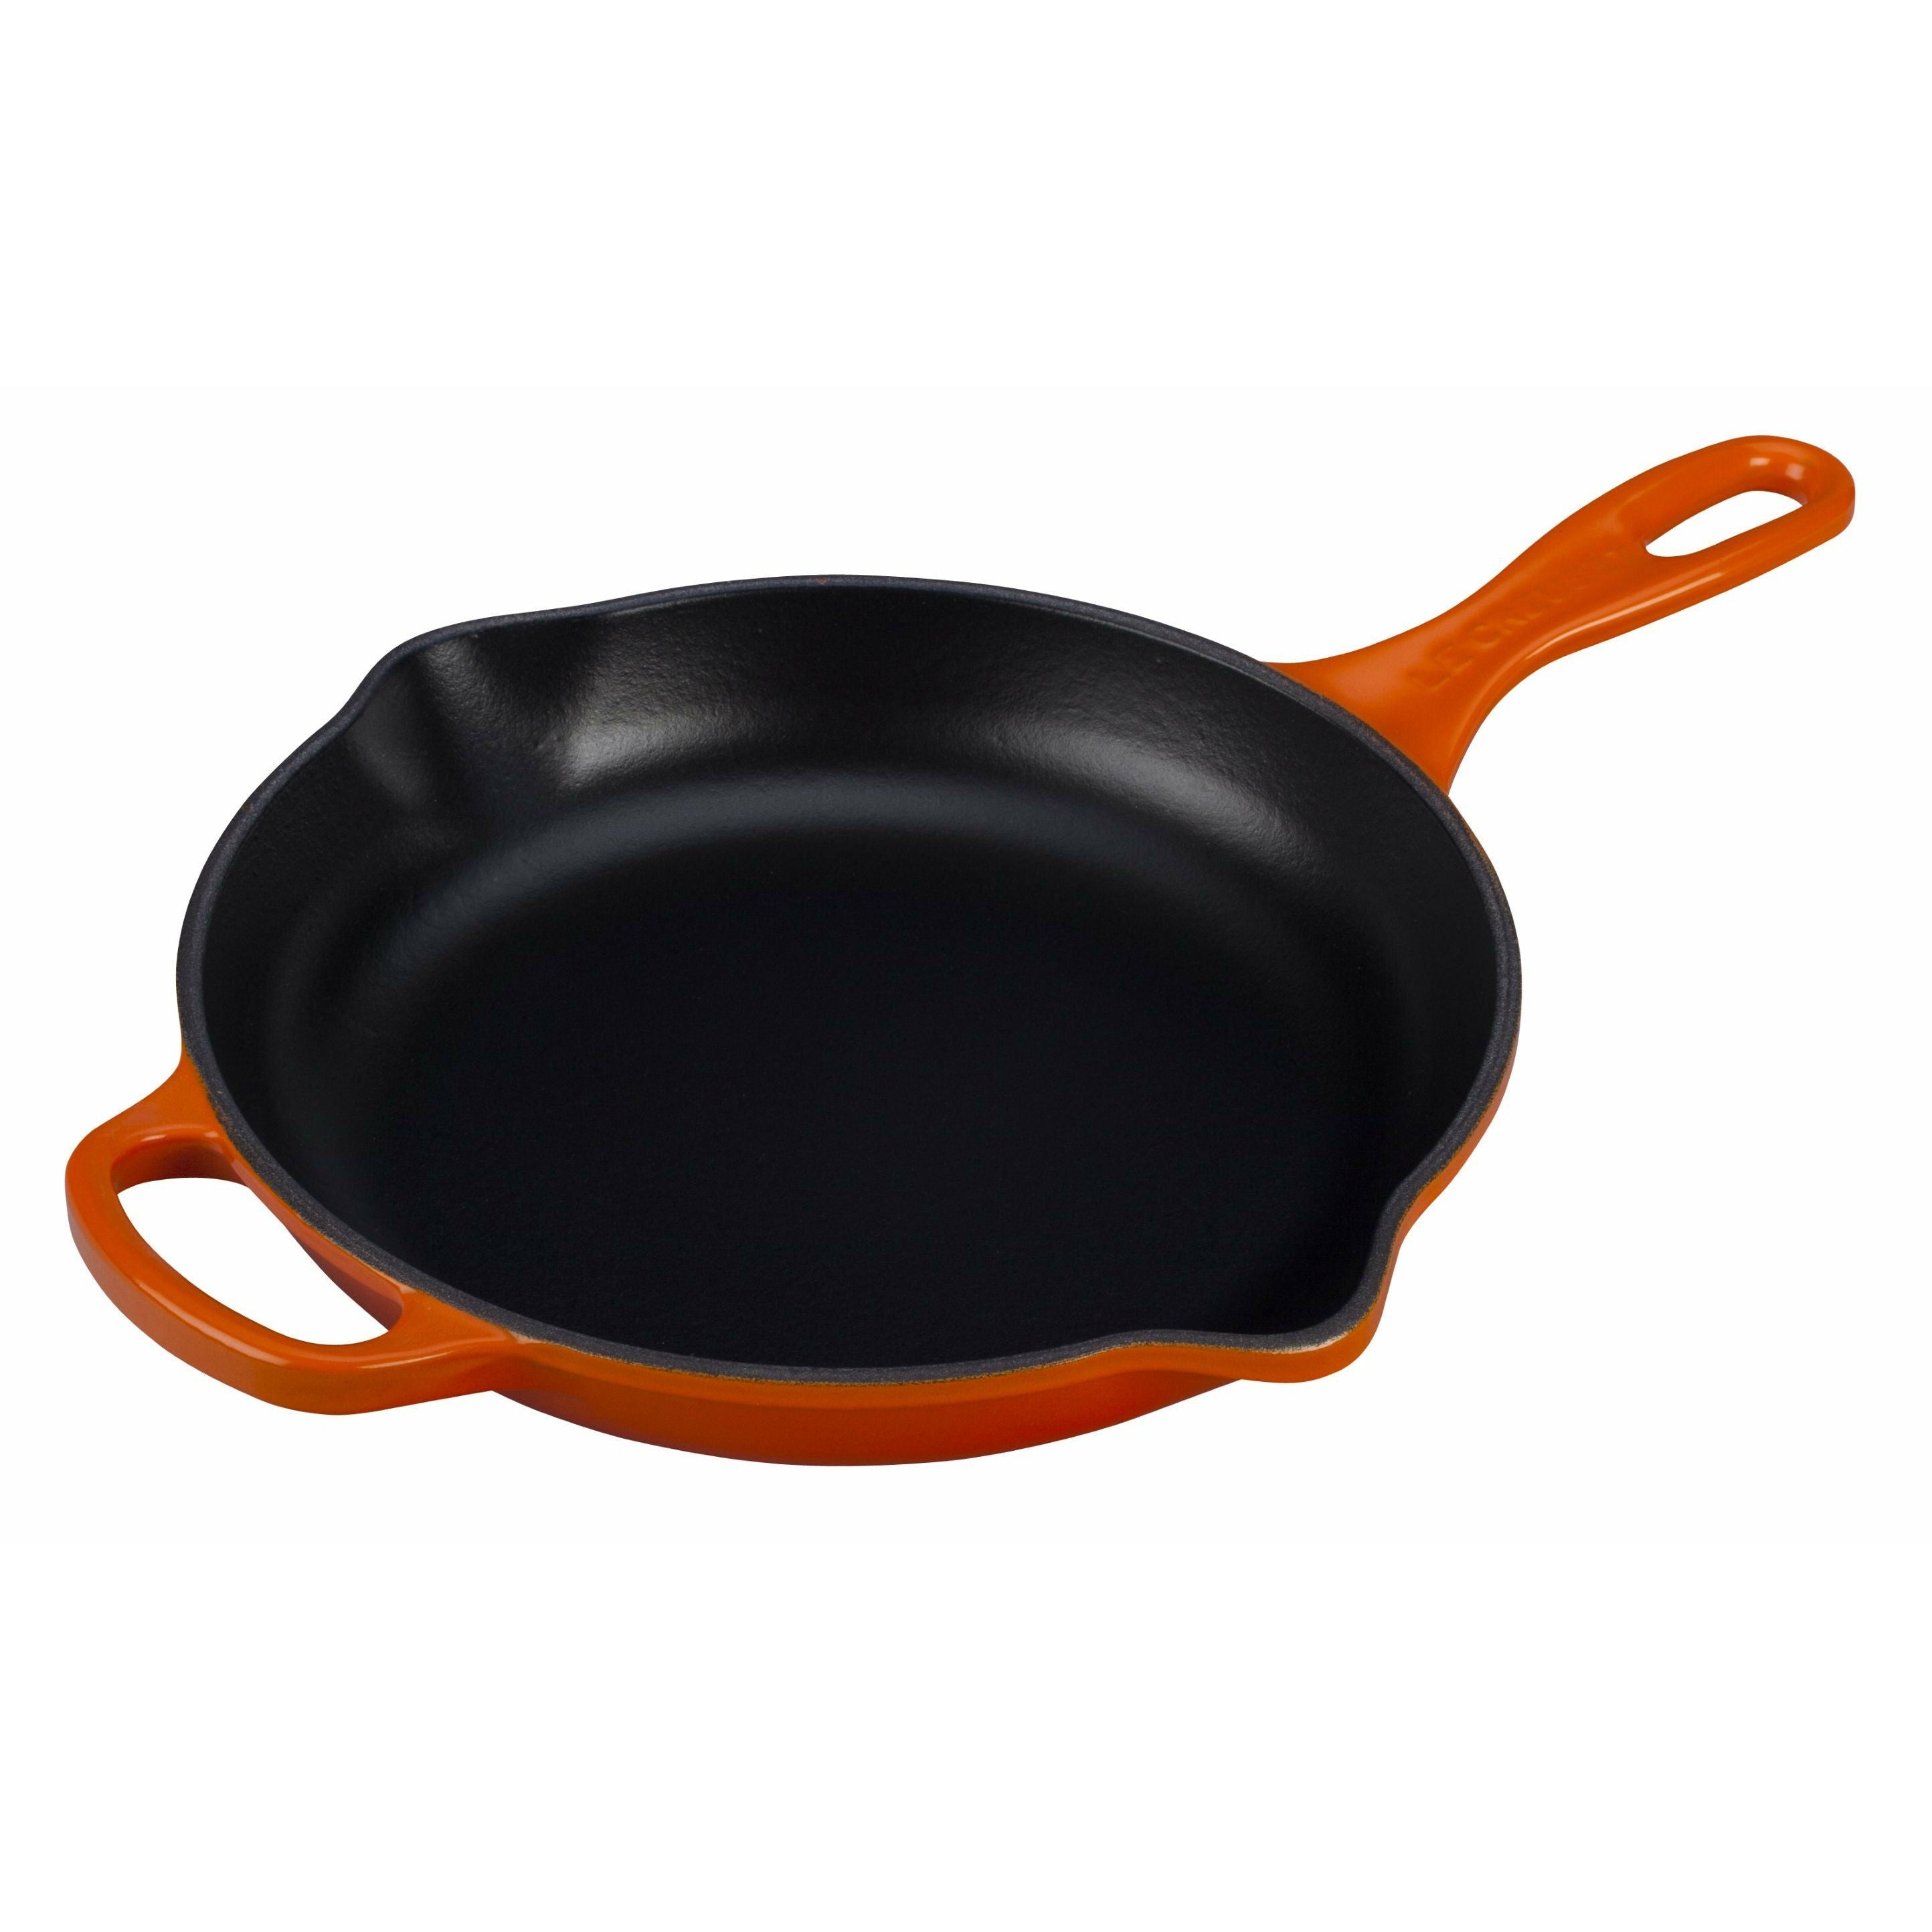 Le Creuset Signature Round Frying And Serving Pan 20 Cm, Oven Red